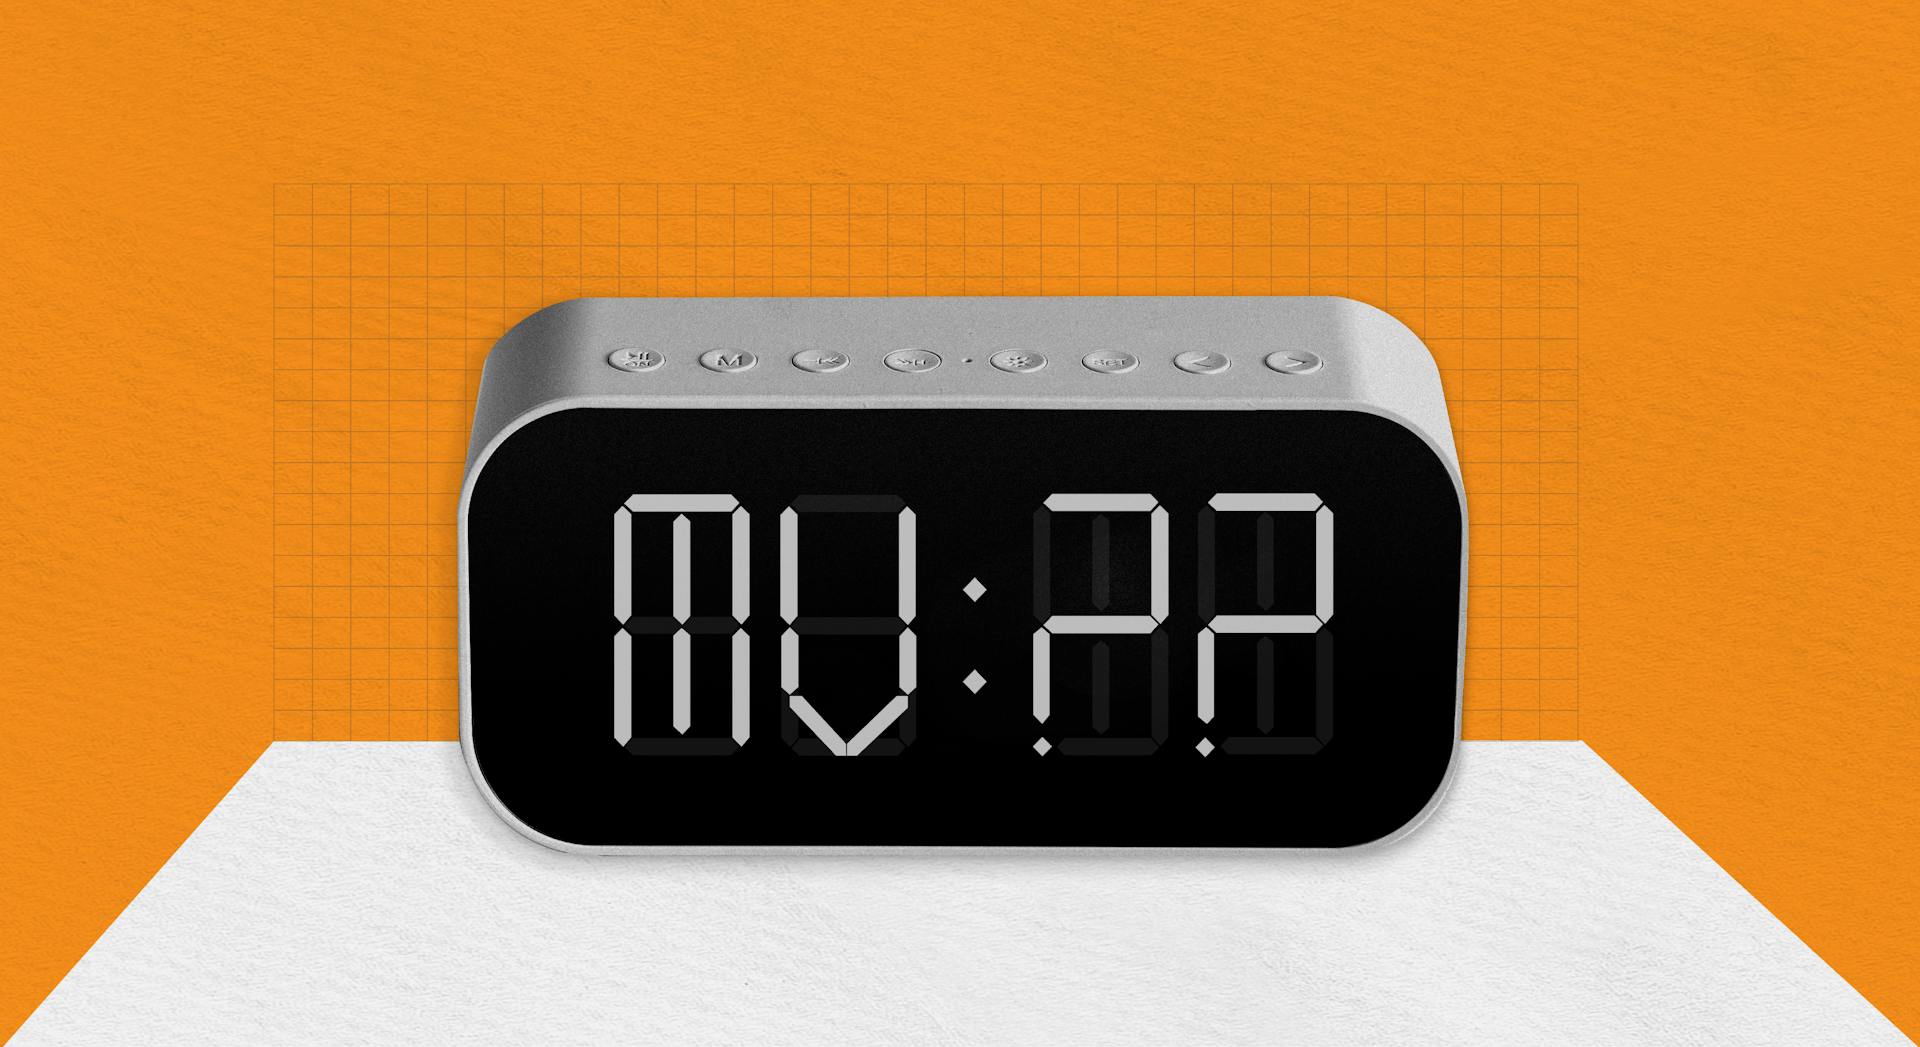 An illustration of an alarm clock with MV:?? on the face, on an orange background